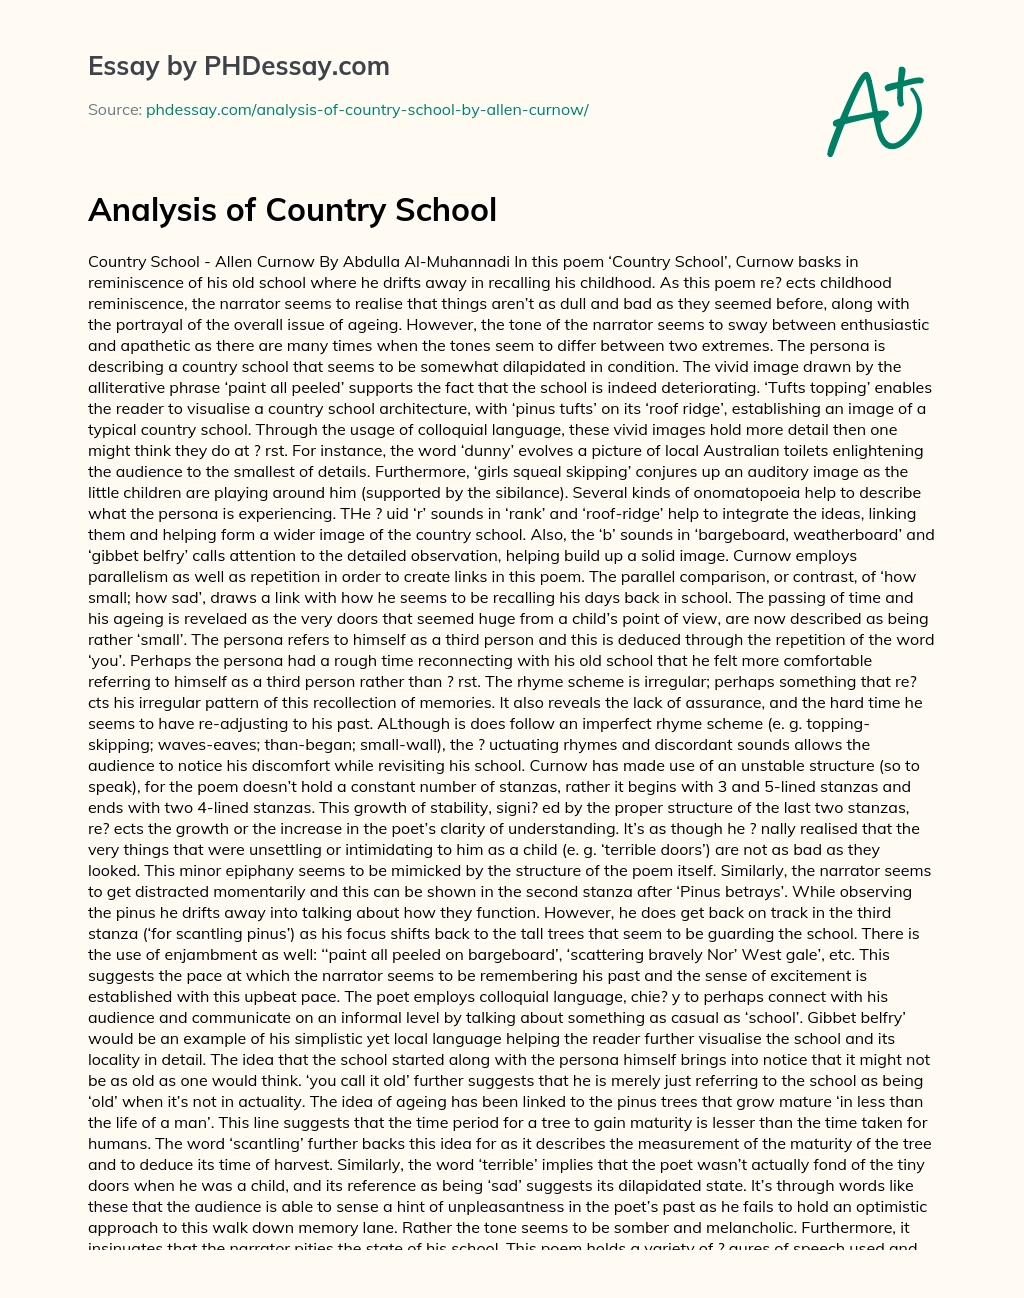 Analysis of Country School essay